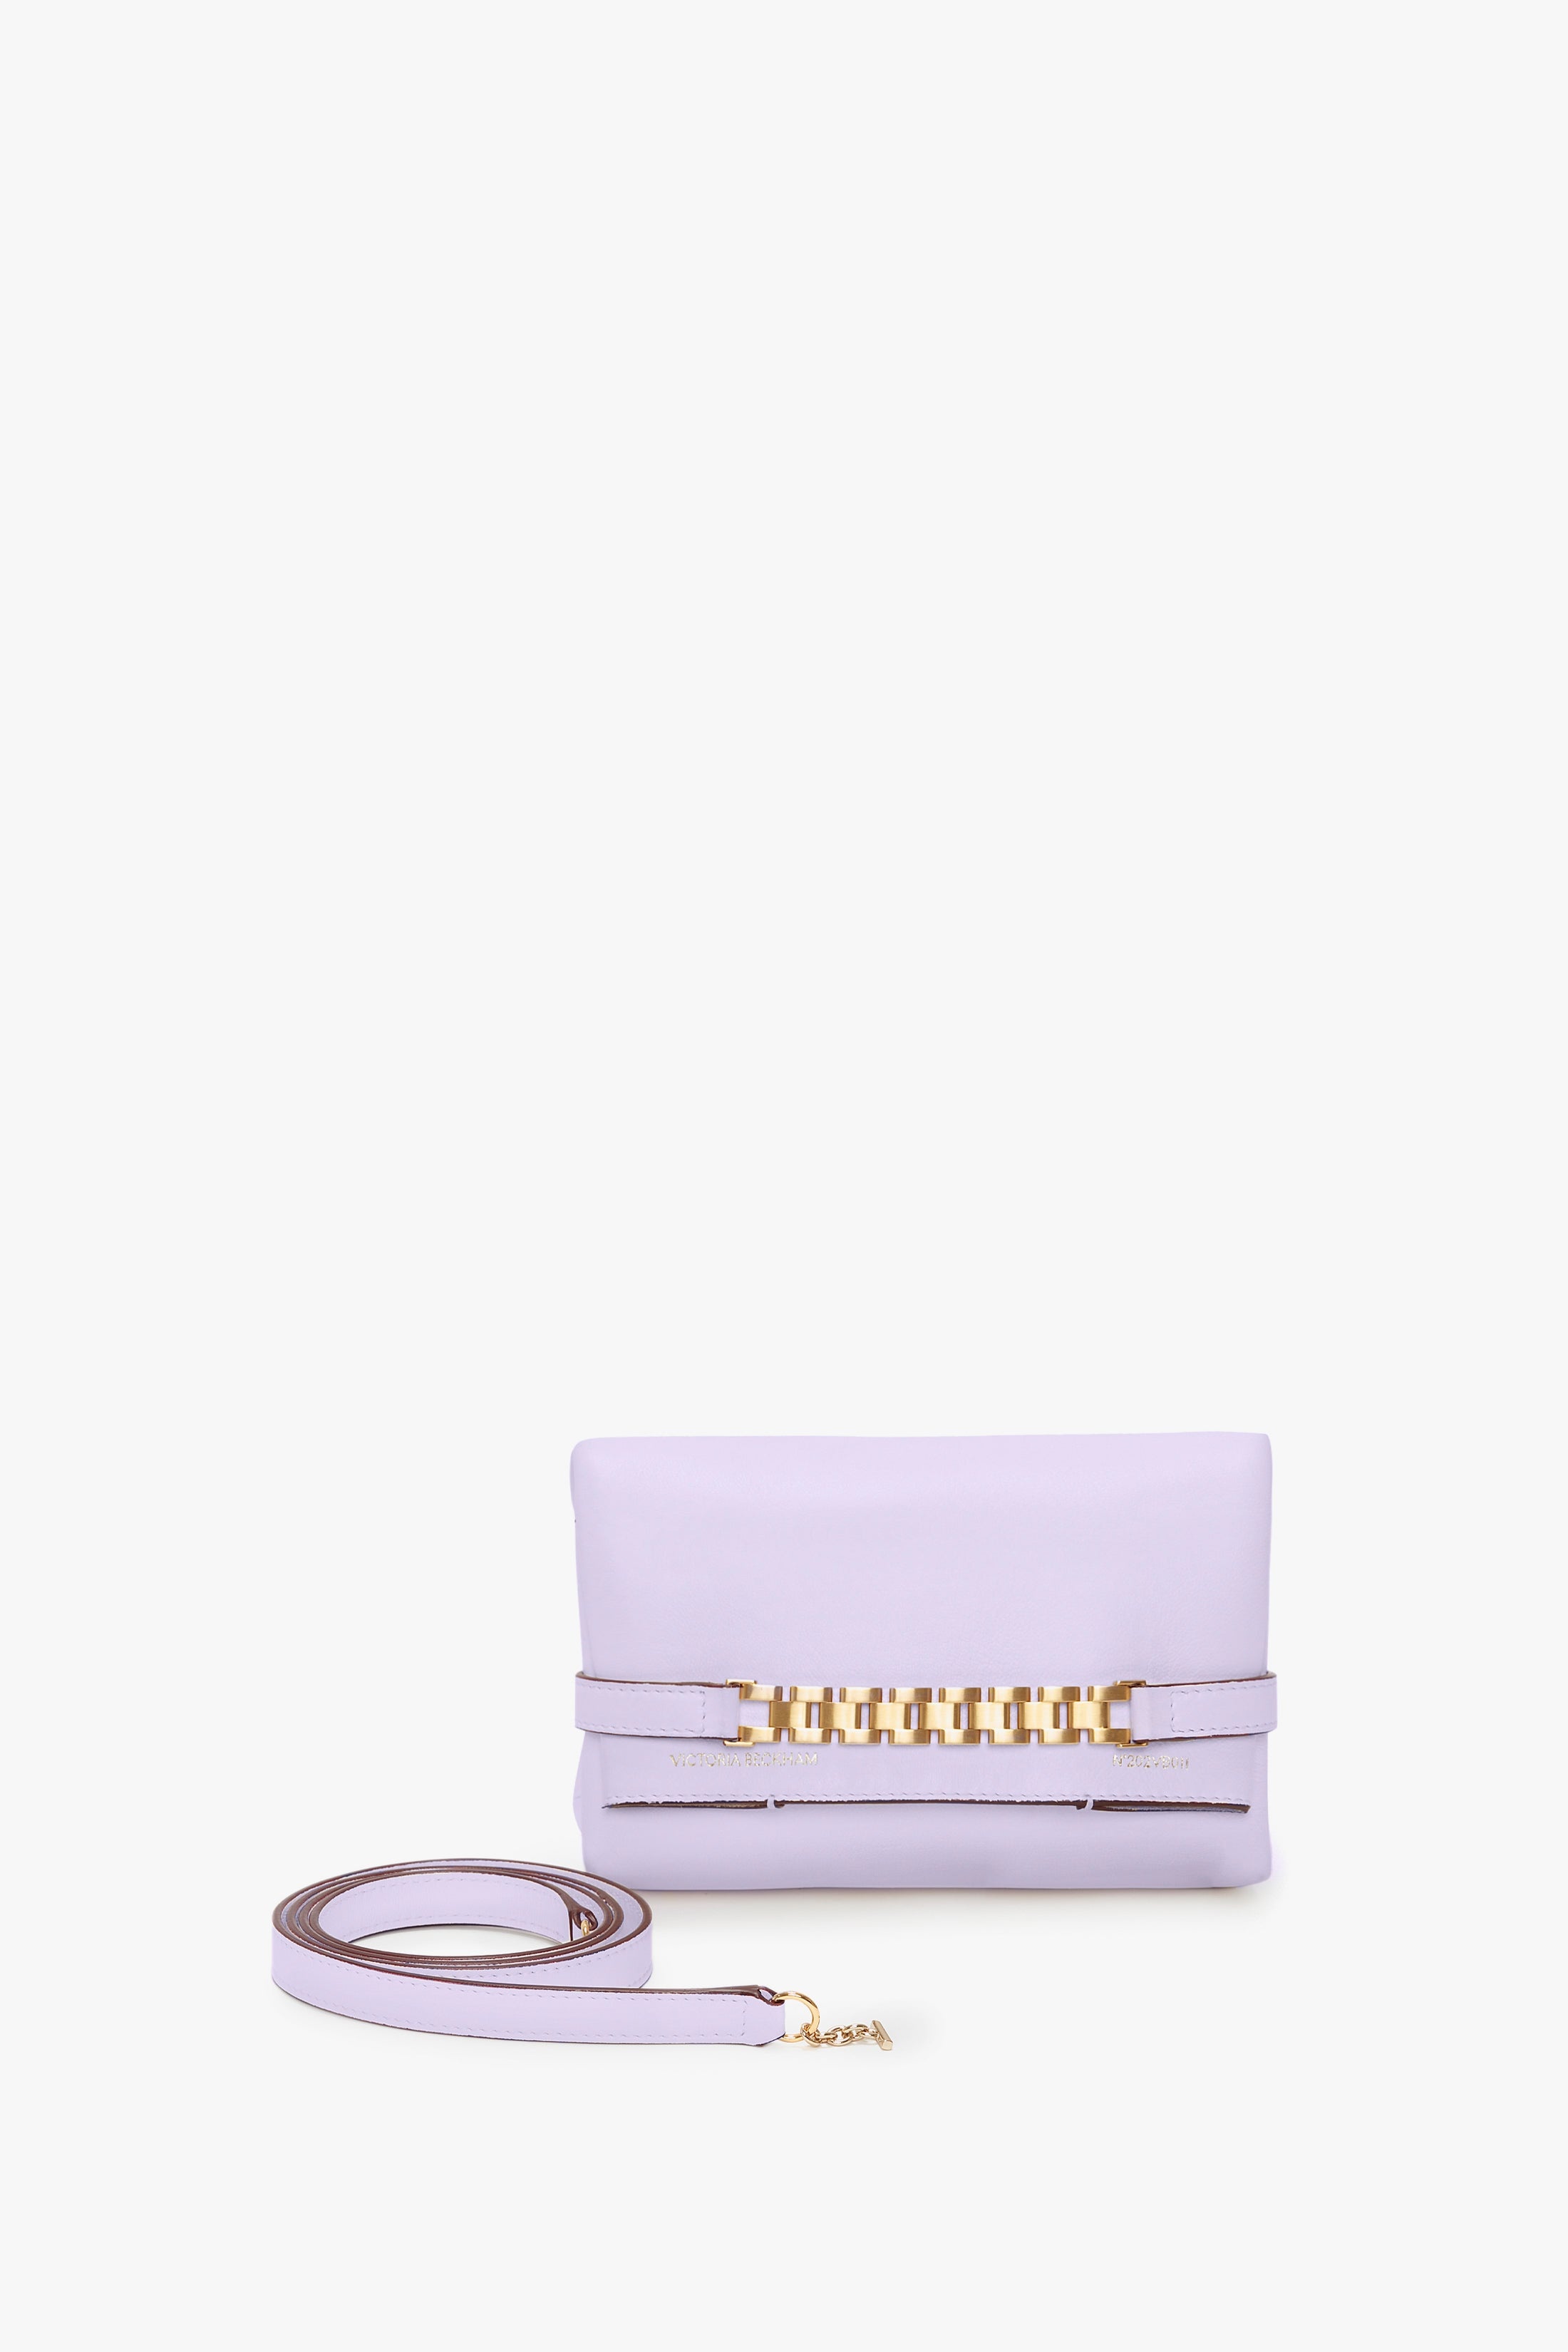 EXCLUSIVE Mini Chain Pouch With Long Strap In Lilac Leather - 7